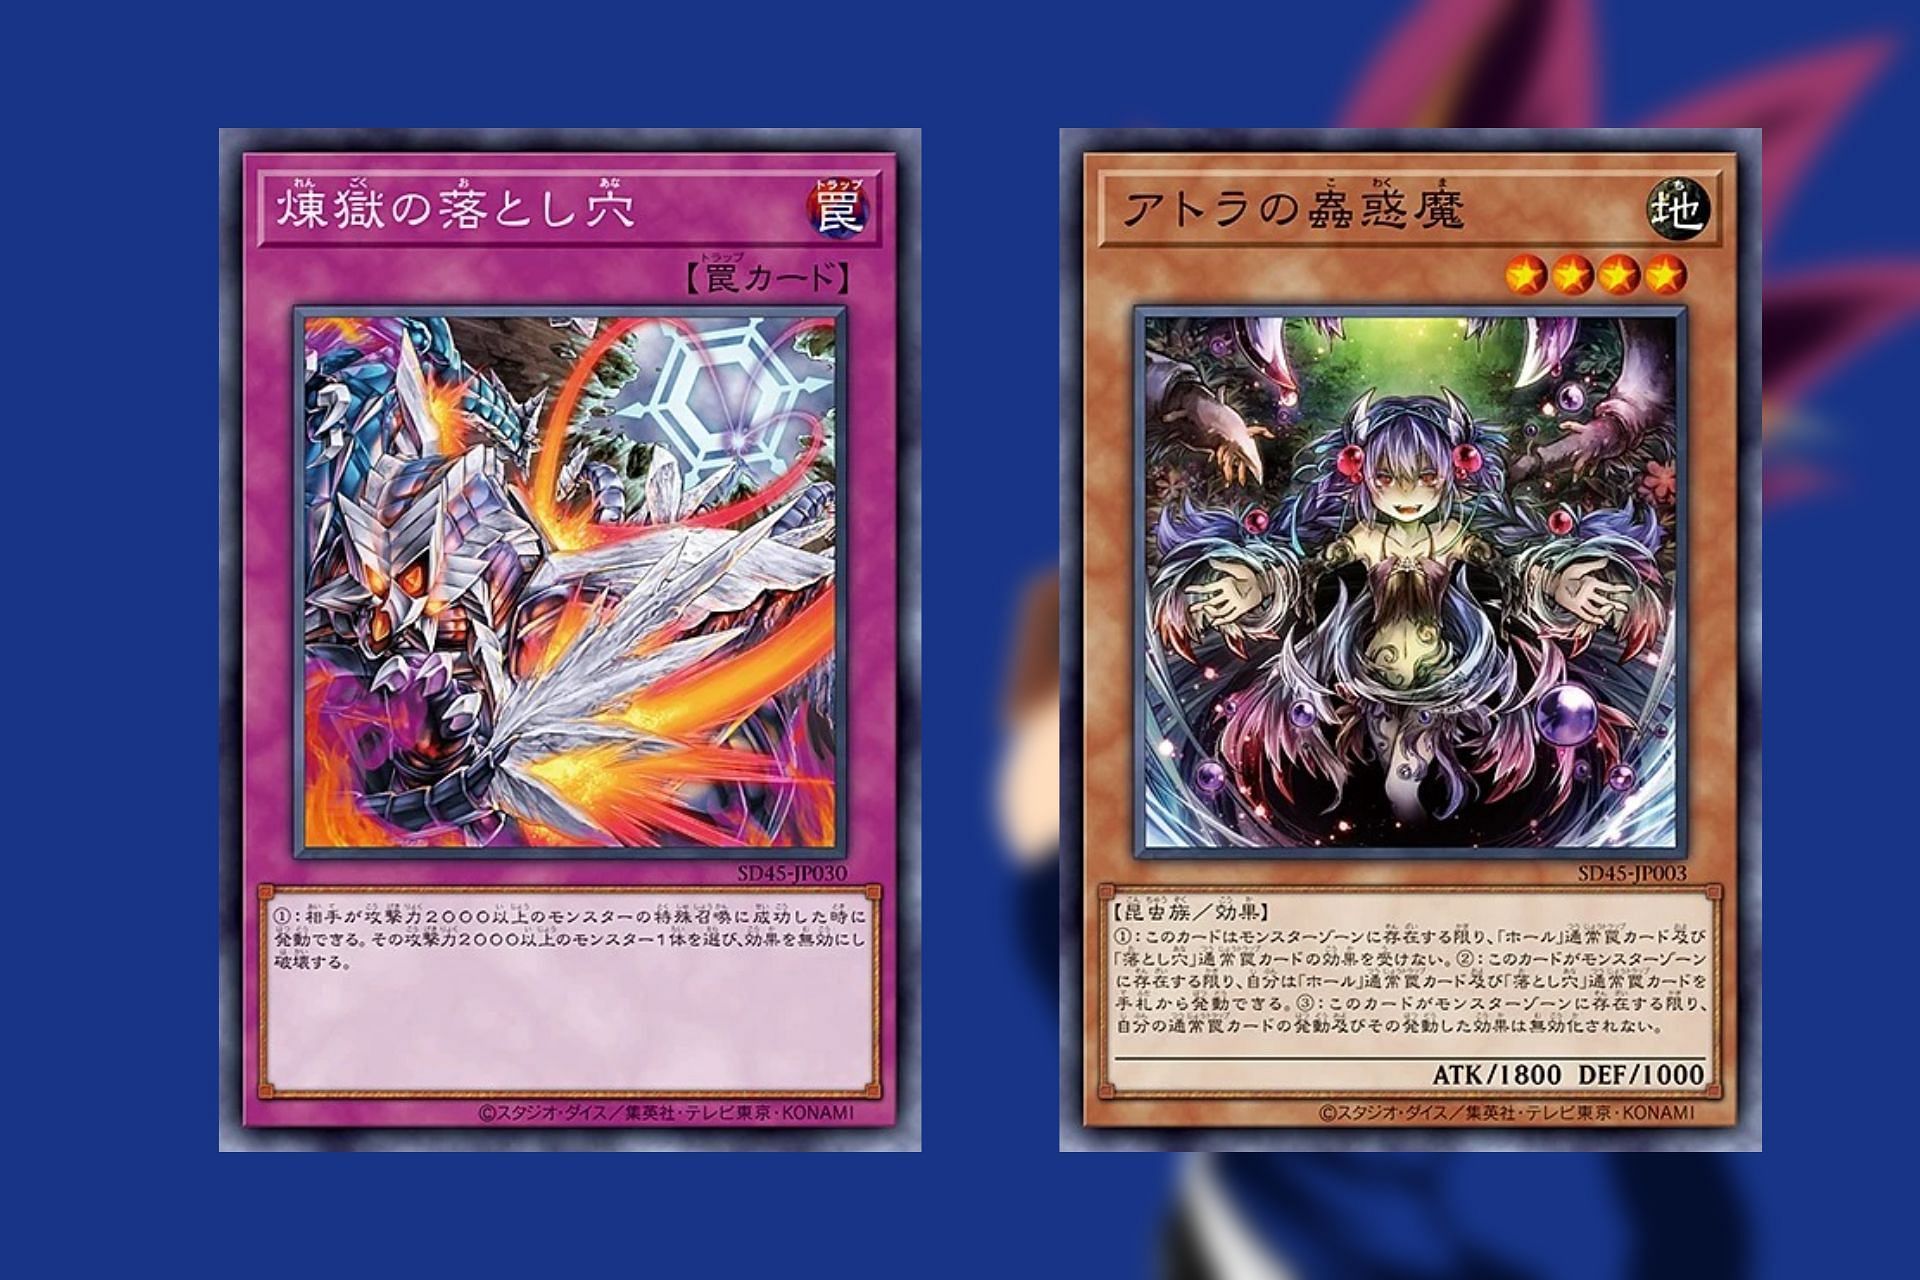 A new Yu-Gi-Oh! structure deck is coming this Winter! (Image via Konami)